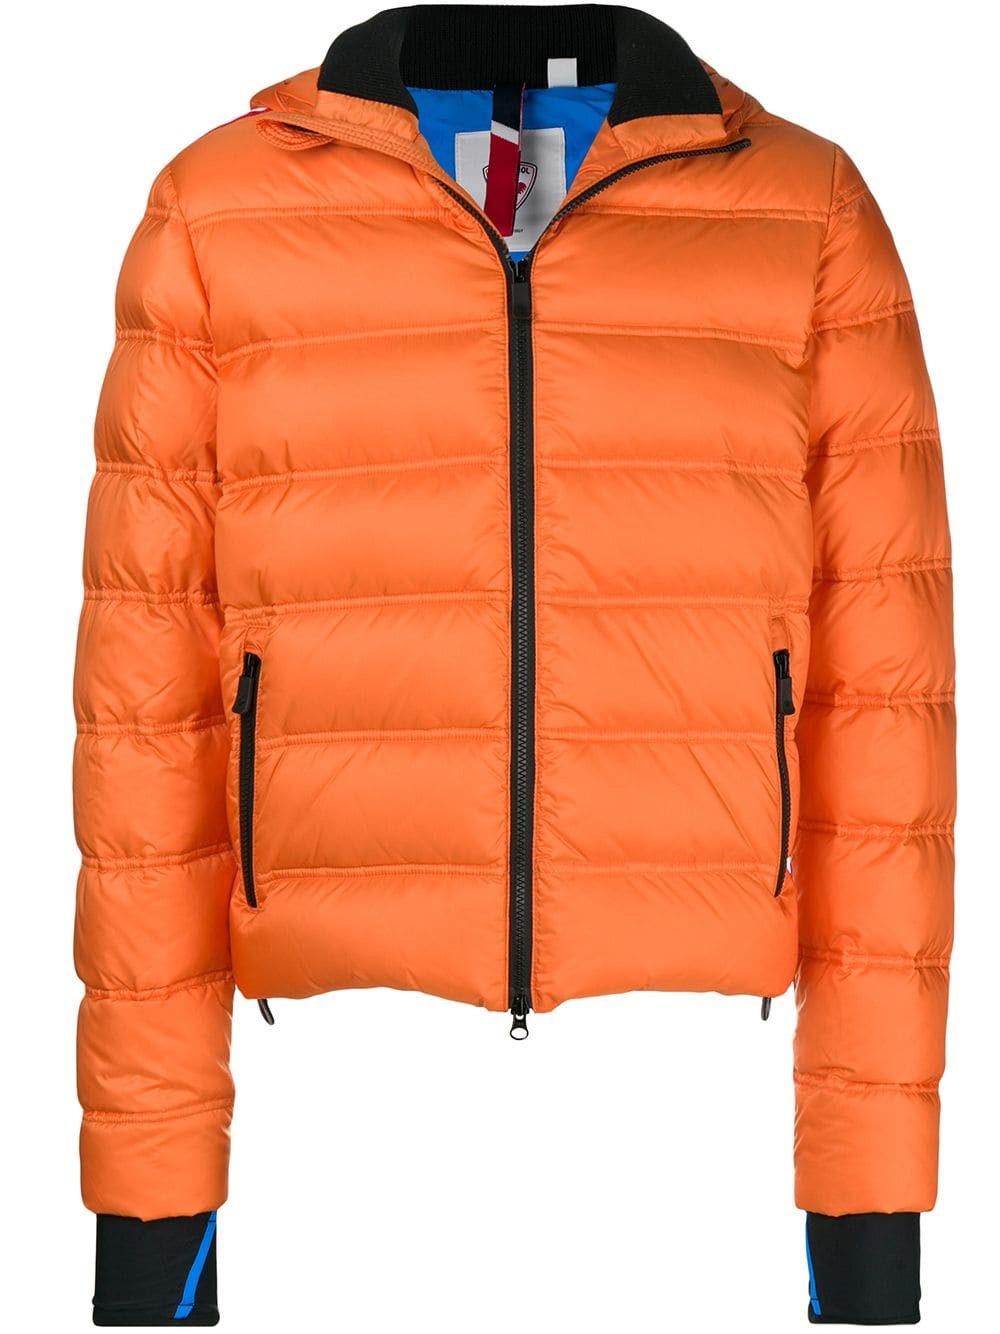 rossignol CESAR JACKET available on montiboutique.com - 24924